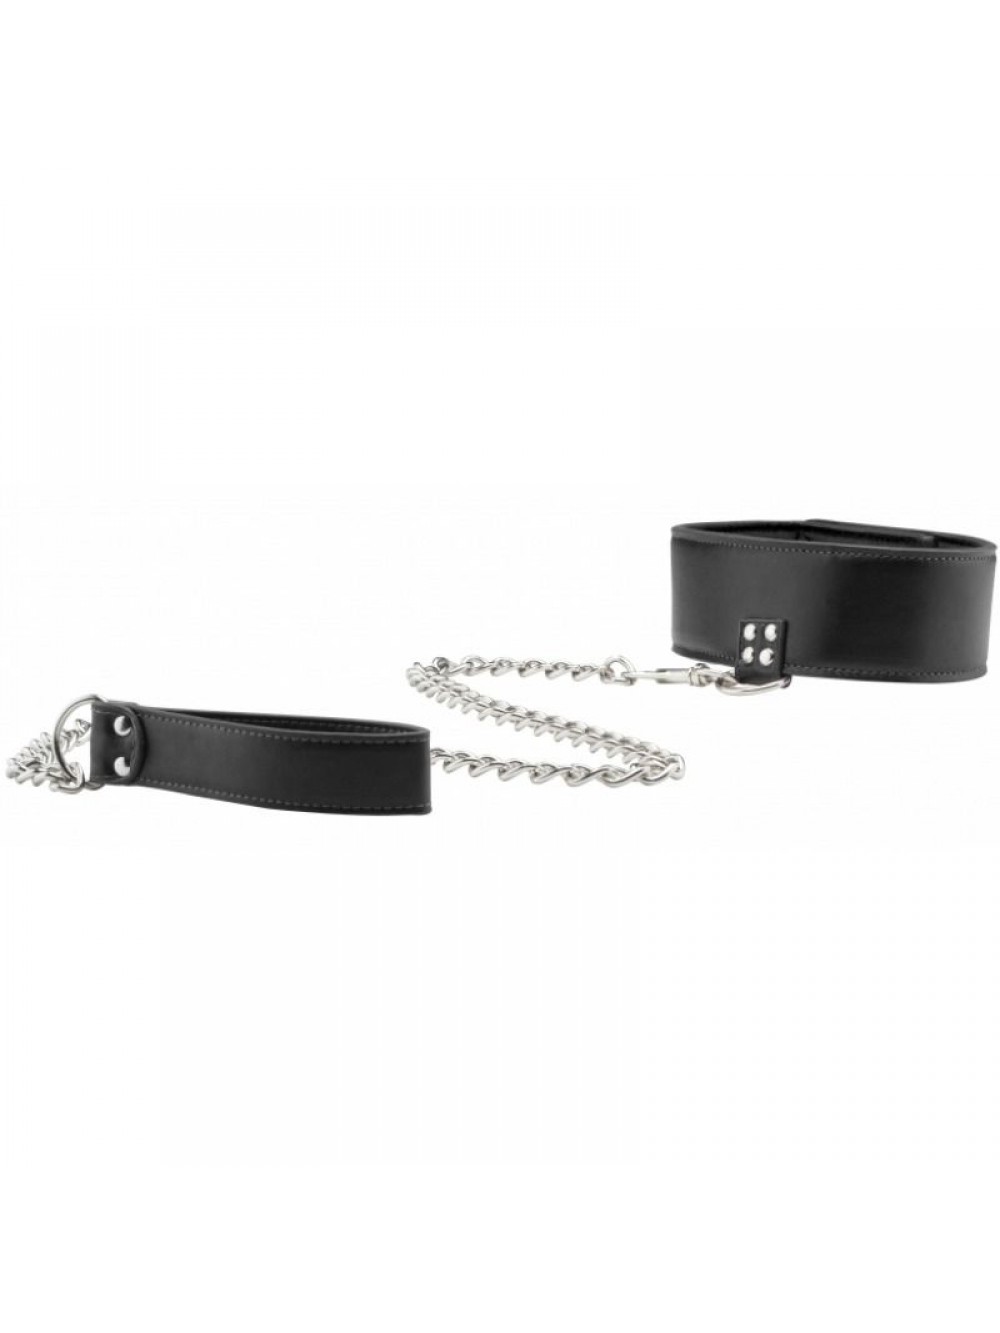 REVERSIBLE COLLAR WITH LEASH-BLACK